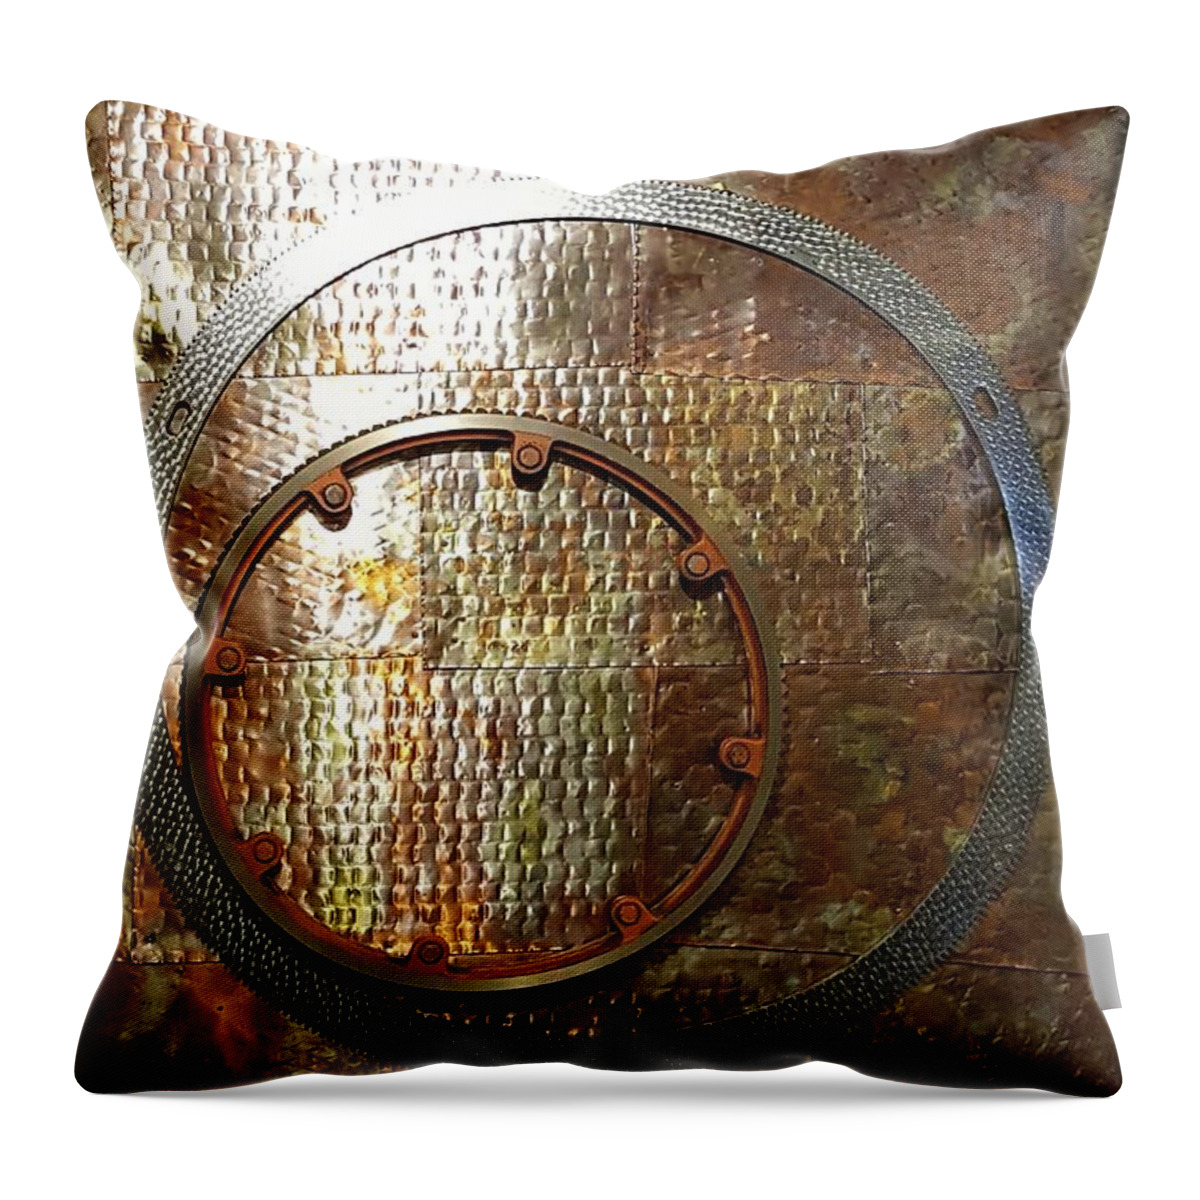 Rings Throw Pillow featuring the photograph 2 Rings Copper by Rob Hans